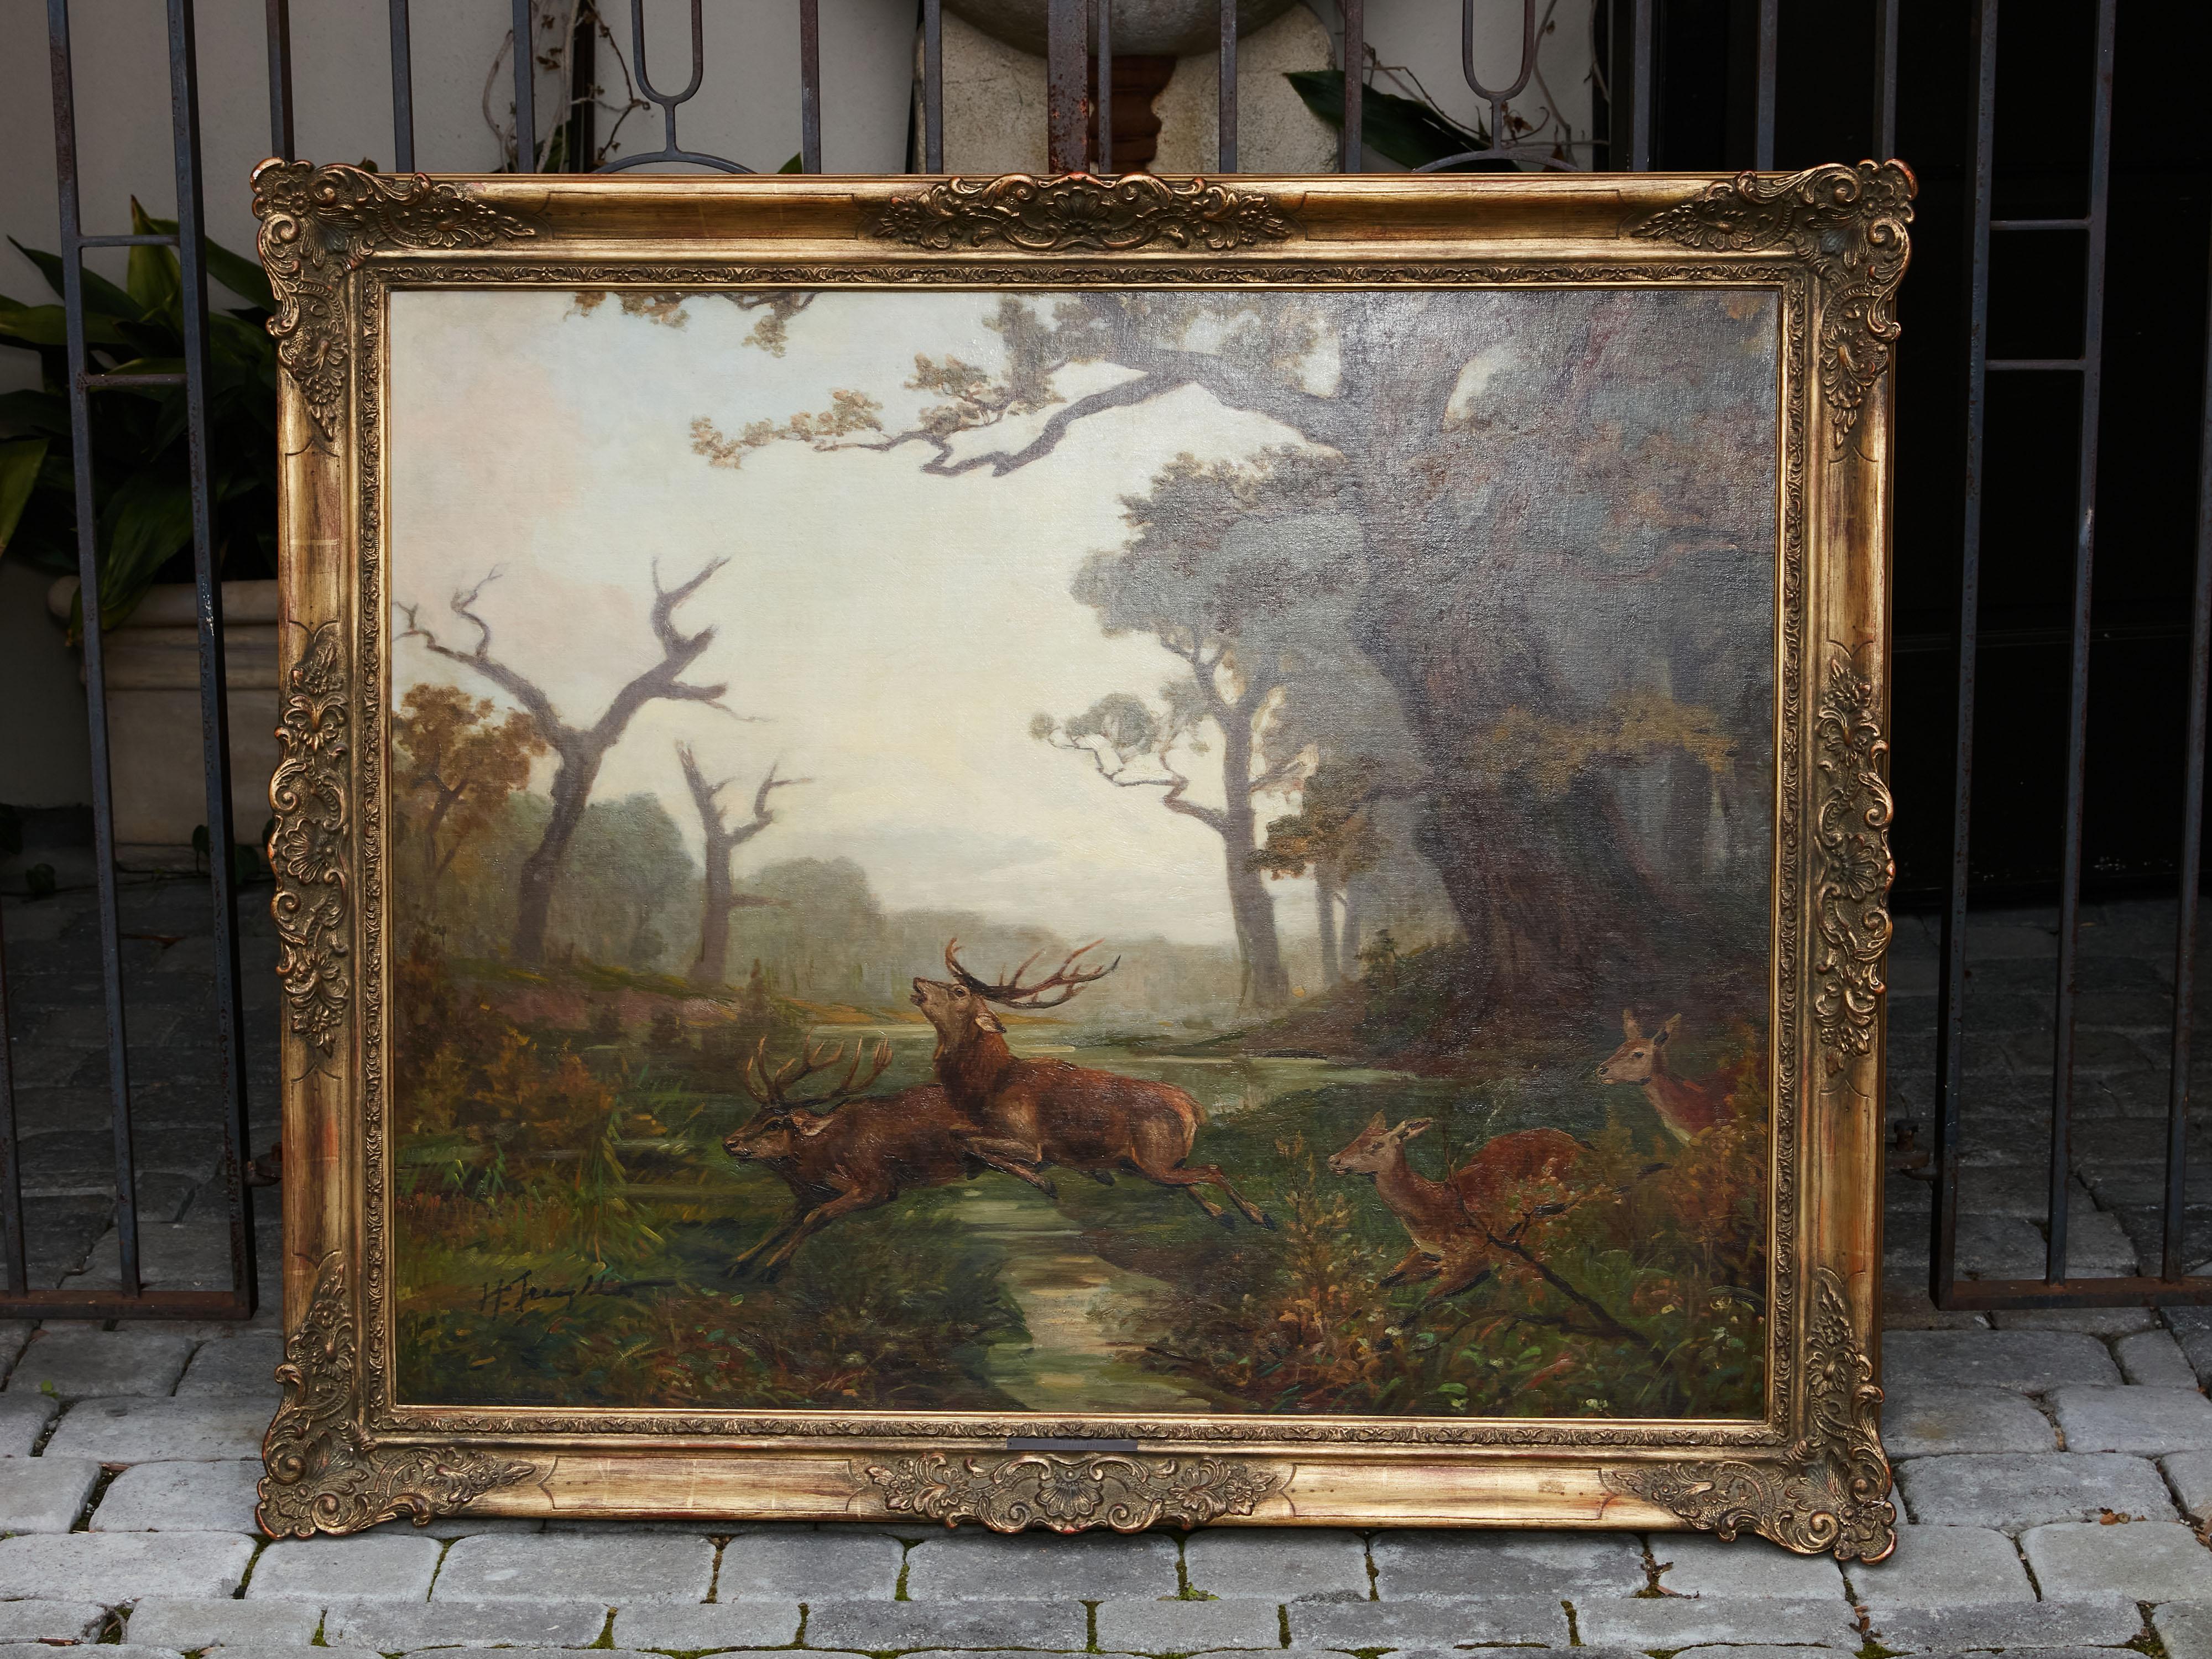 20th Century Belgian Oil on Canvas Painting Depicting a Herd of Running Deer, circa 1900-1940